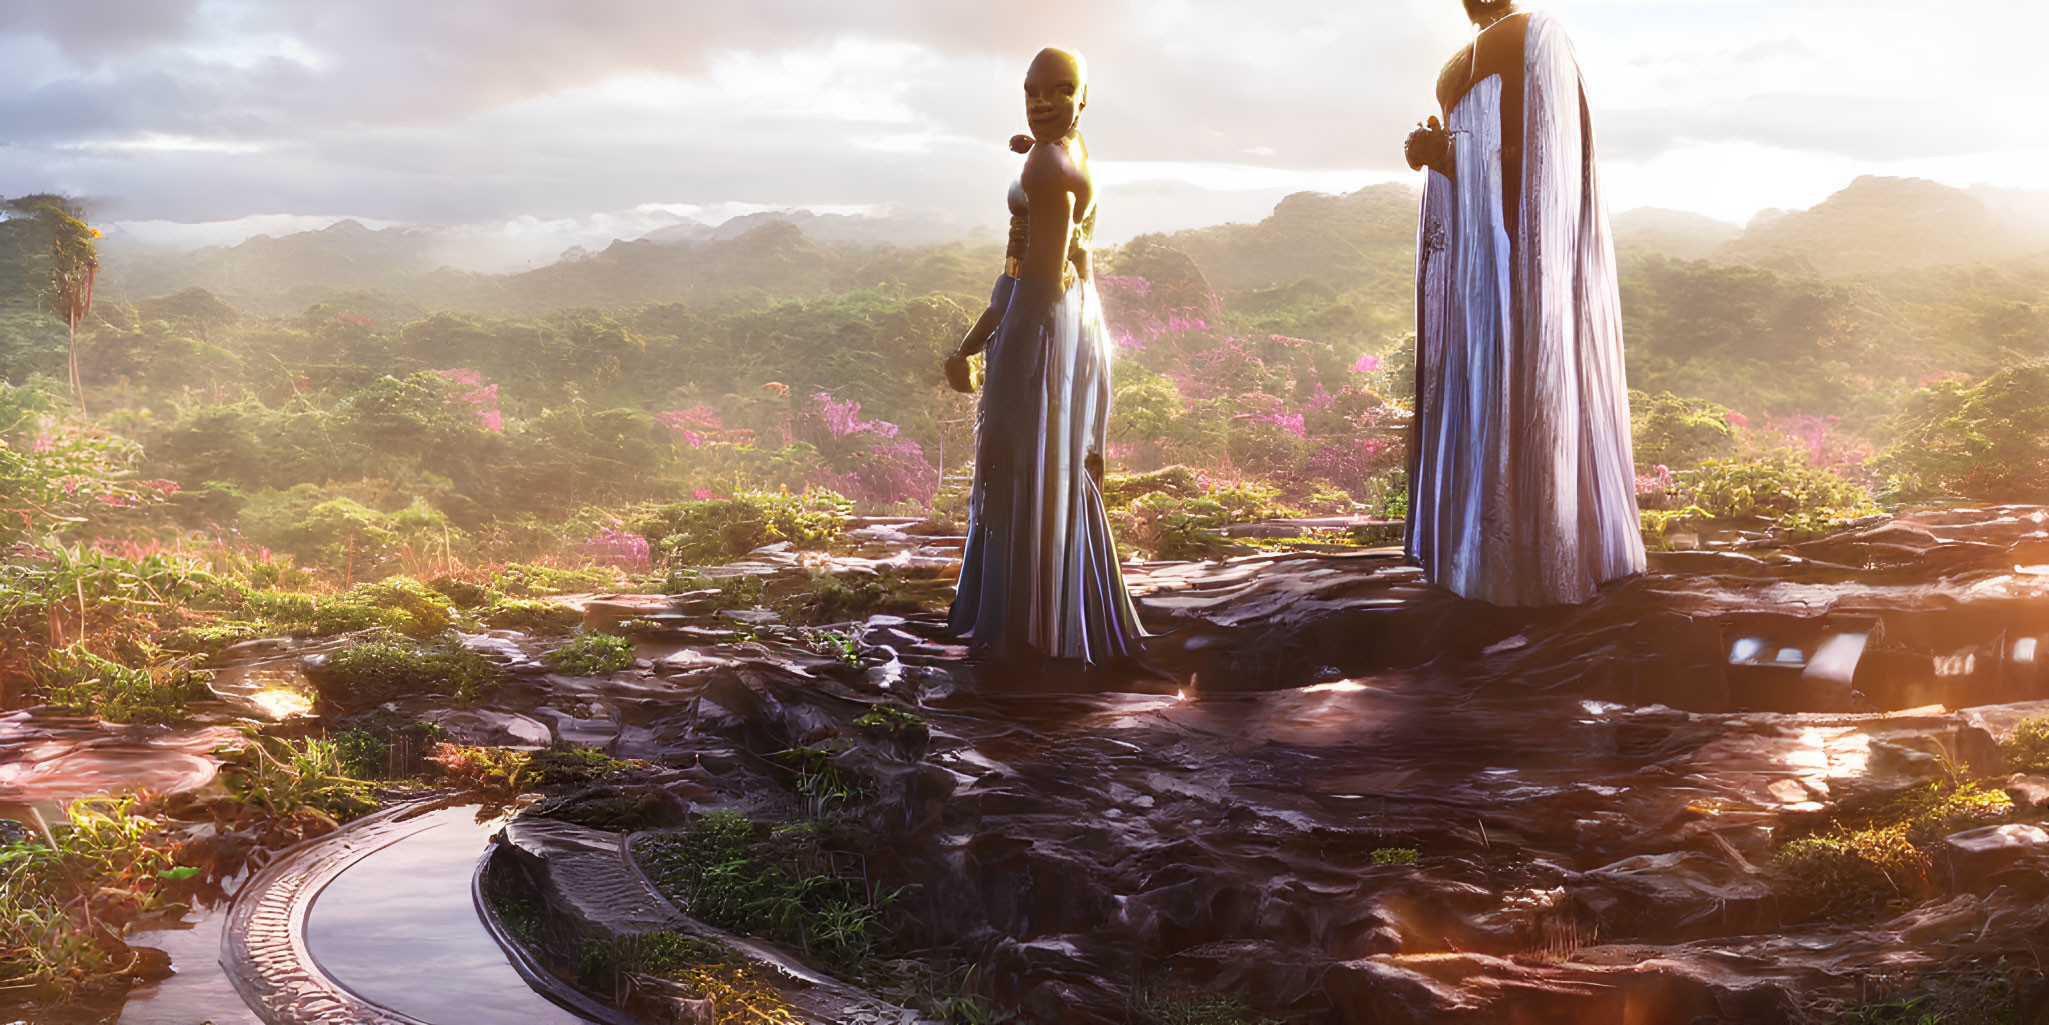 Futuristic humanoid figures in vibrant landscape with pink flora at sunrise